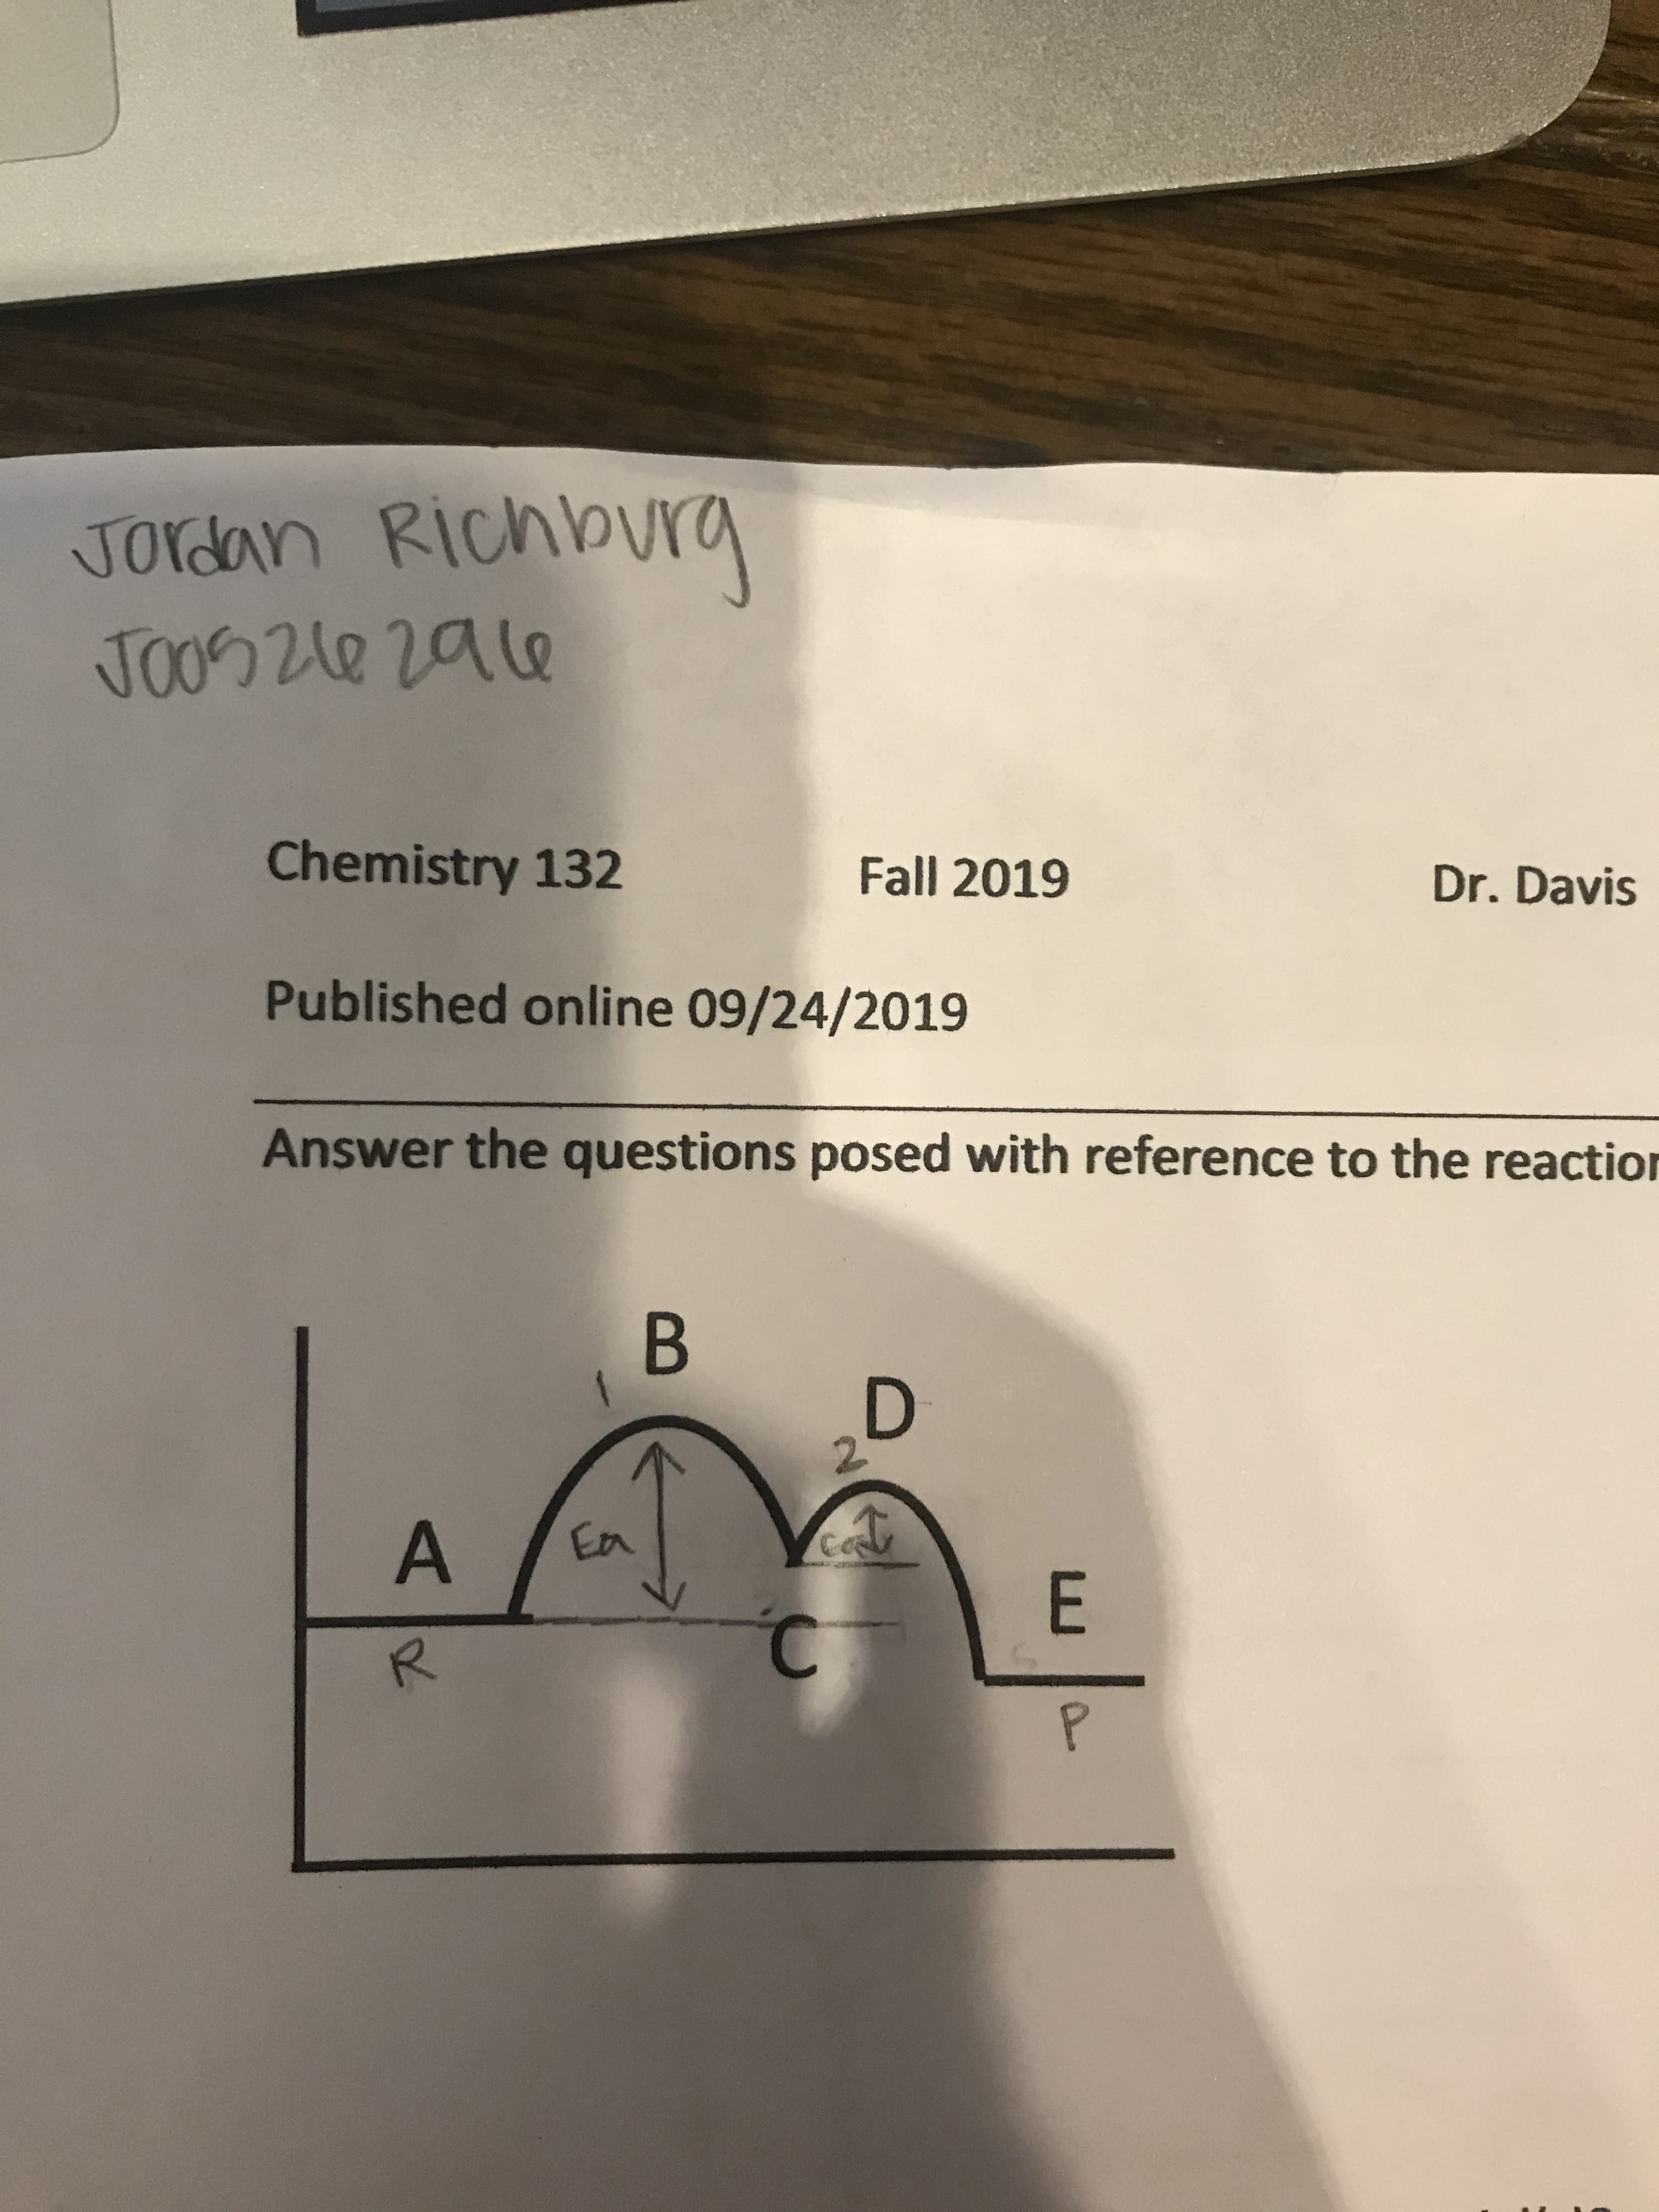 JOrdan Richlovra
Chemistry 132
Fall 2019
Dr.Davis
Published online 09/24/2019
Answer the questions posed with reference to the reaction
В
D
22
A
En
E
C
R
P
